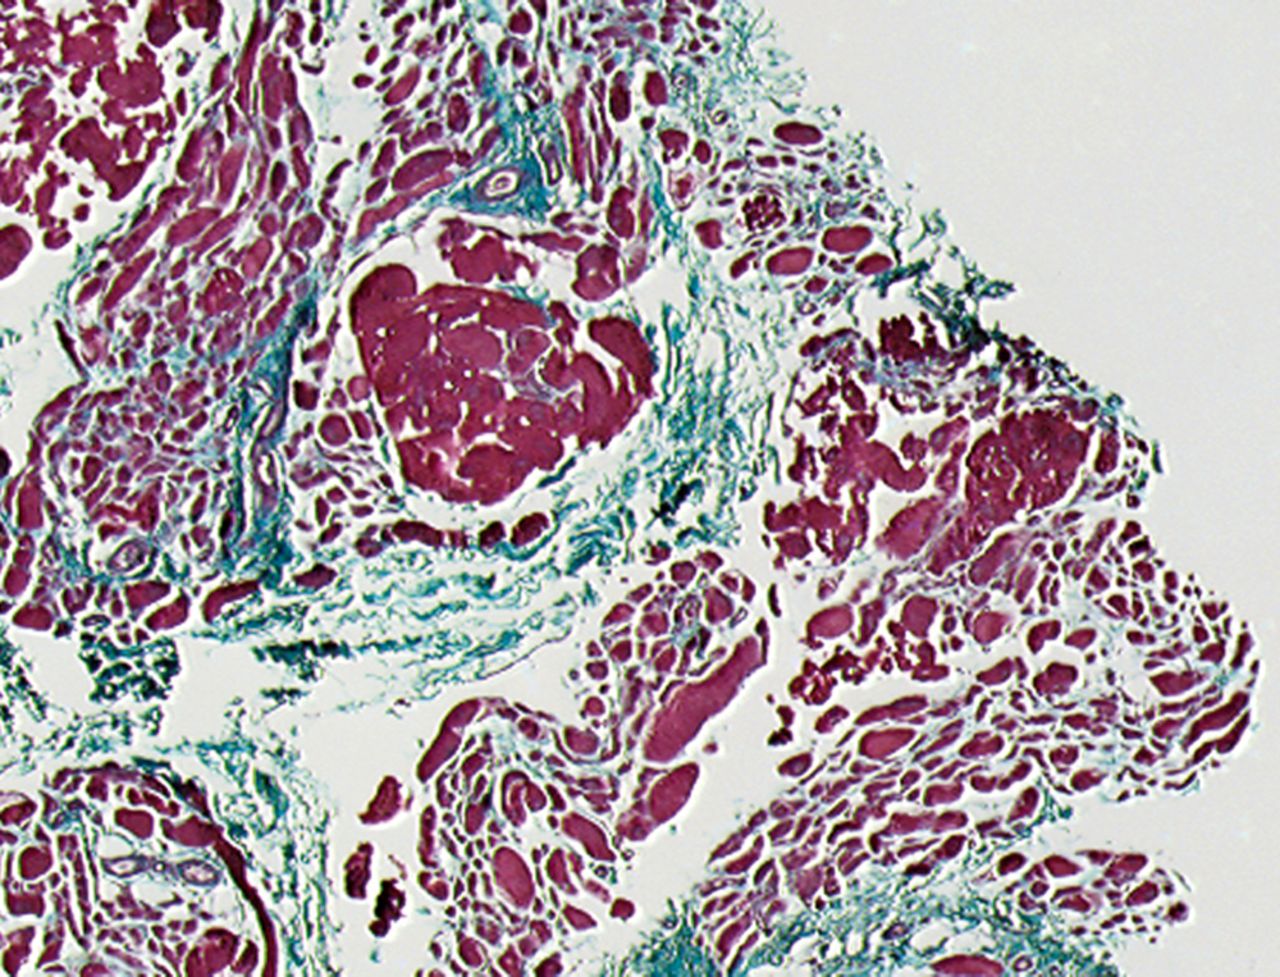 Figs. 2a - 2b 
          Histological images showing Masson’s
trichrome staining of a representative muscle biopsy a) pre- and
b) three months post-transplantation (magnification 5×).
        